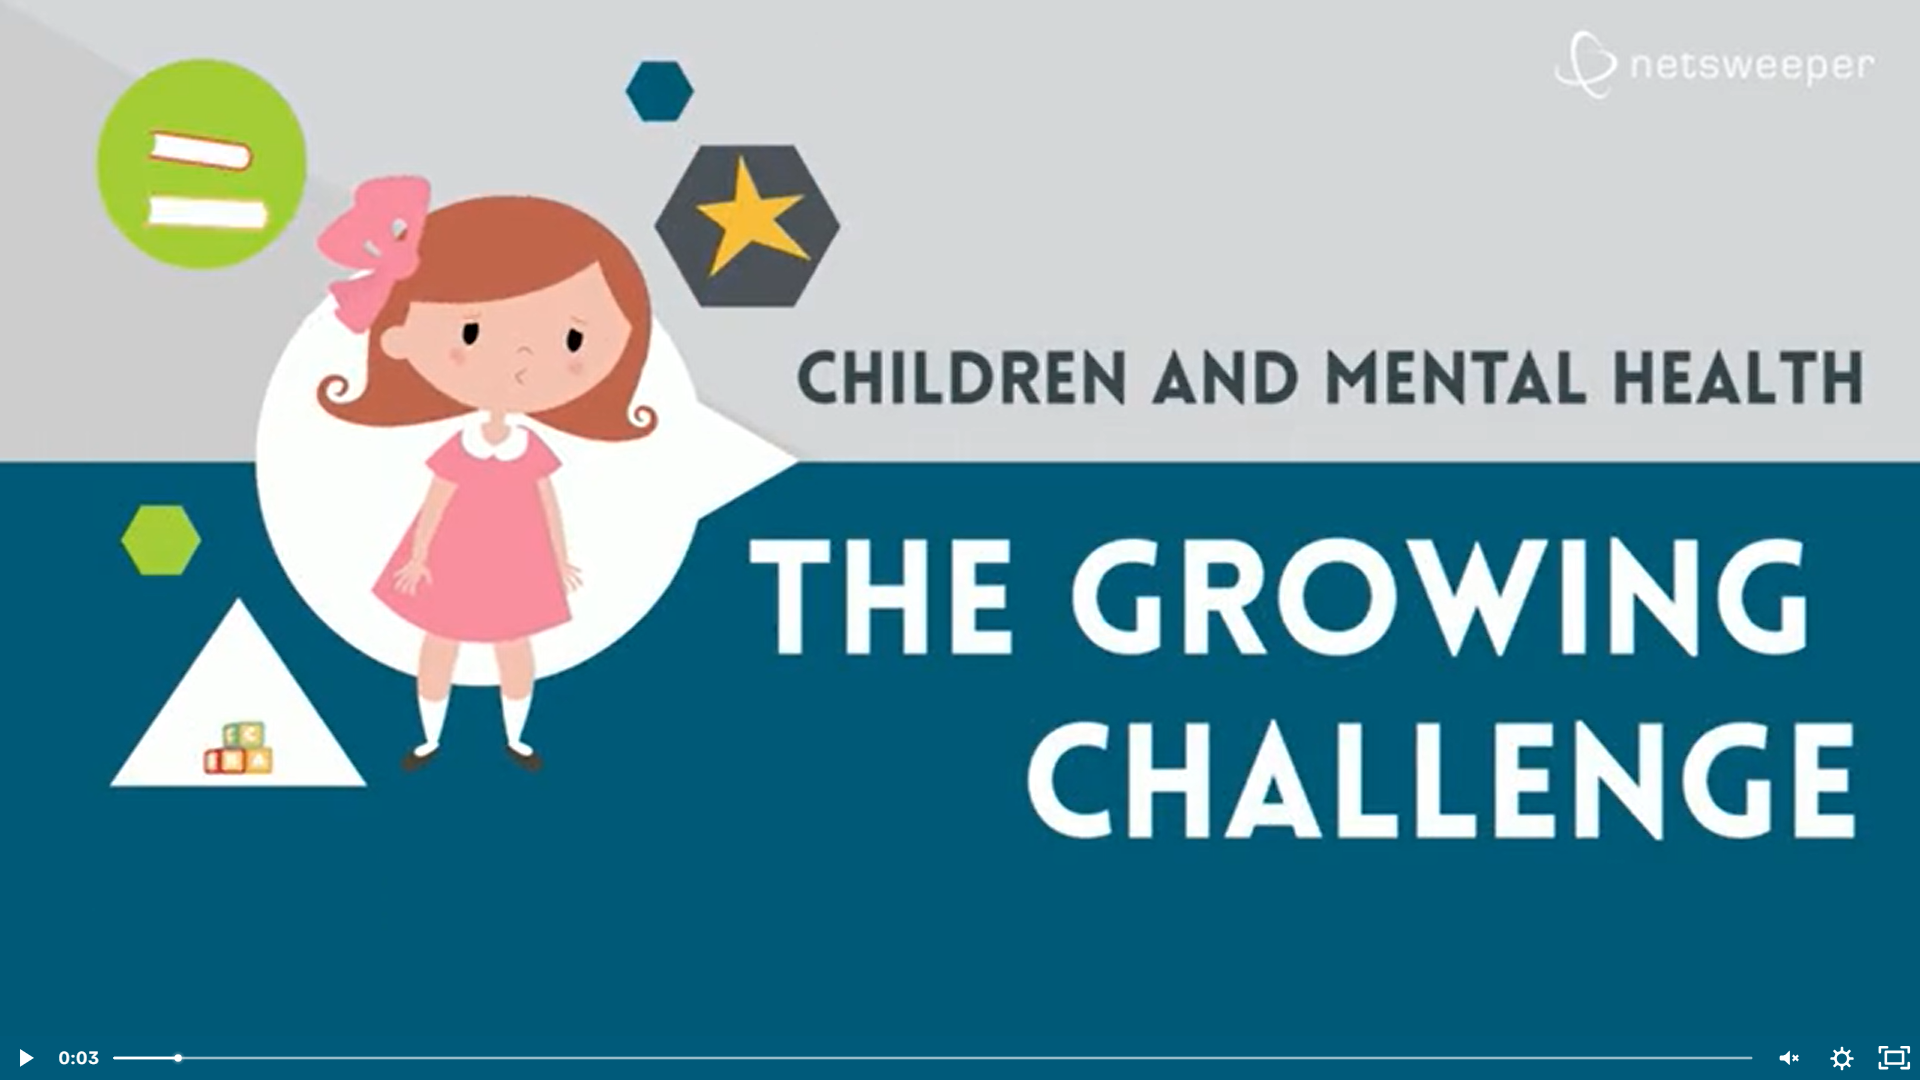 Children and Mental Health: The Growing Challenge - Netsweeper